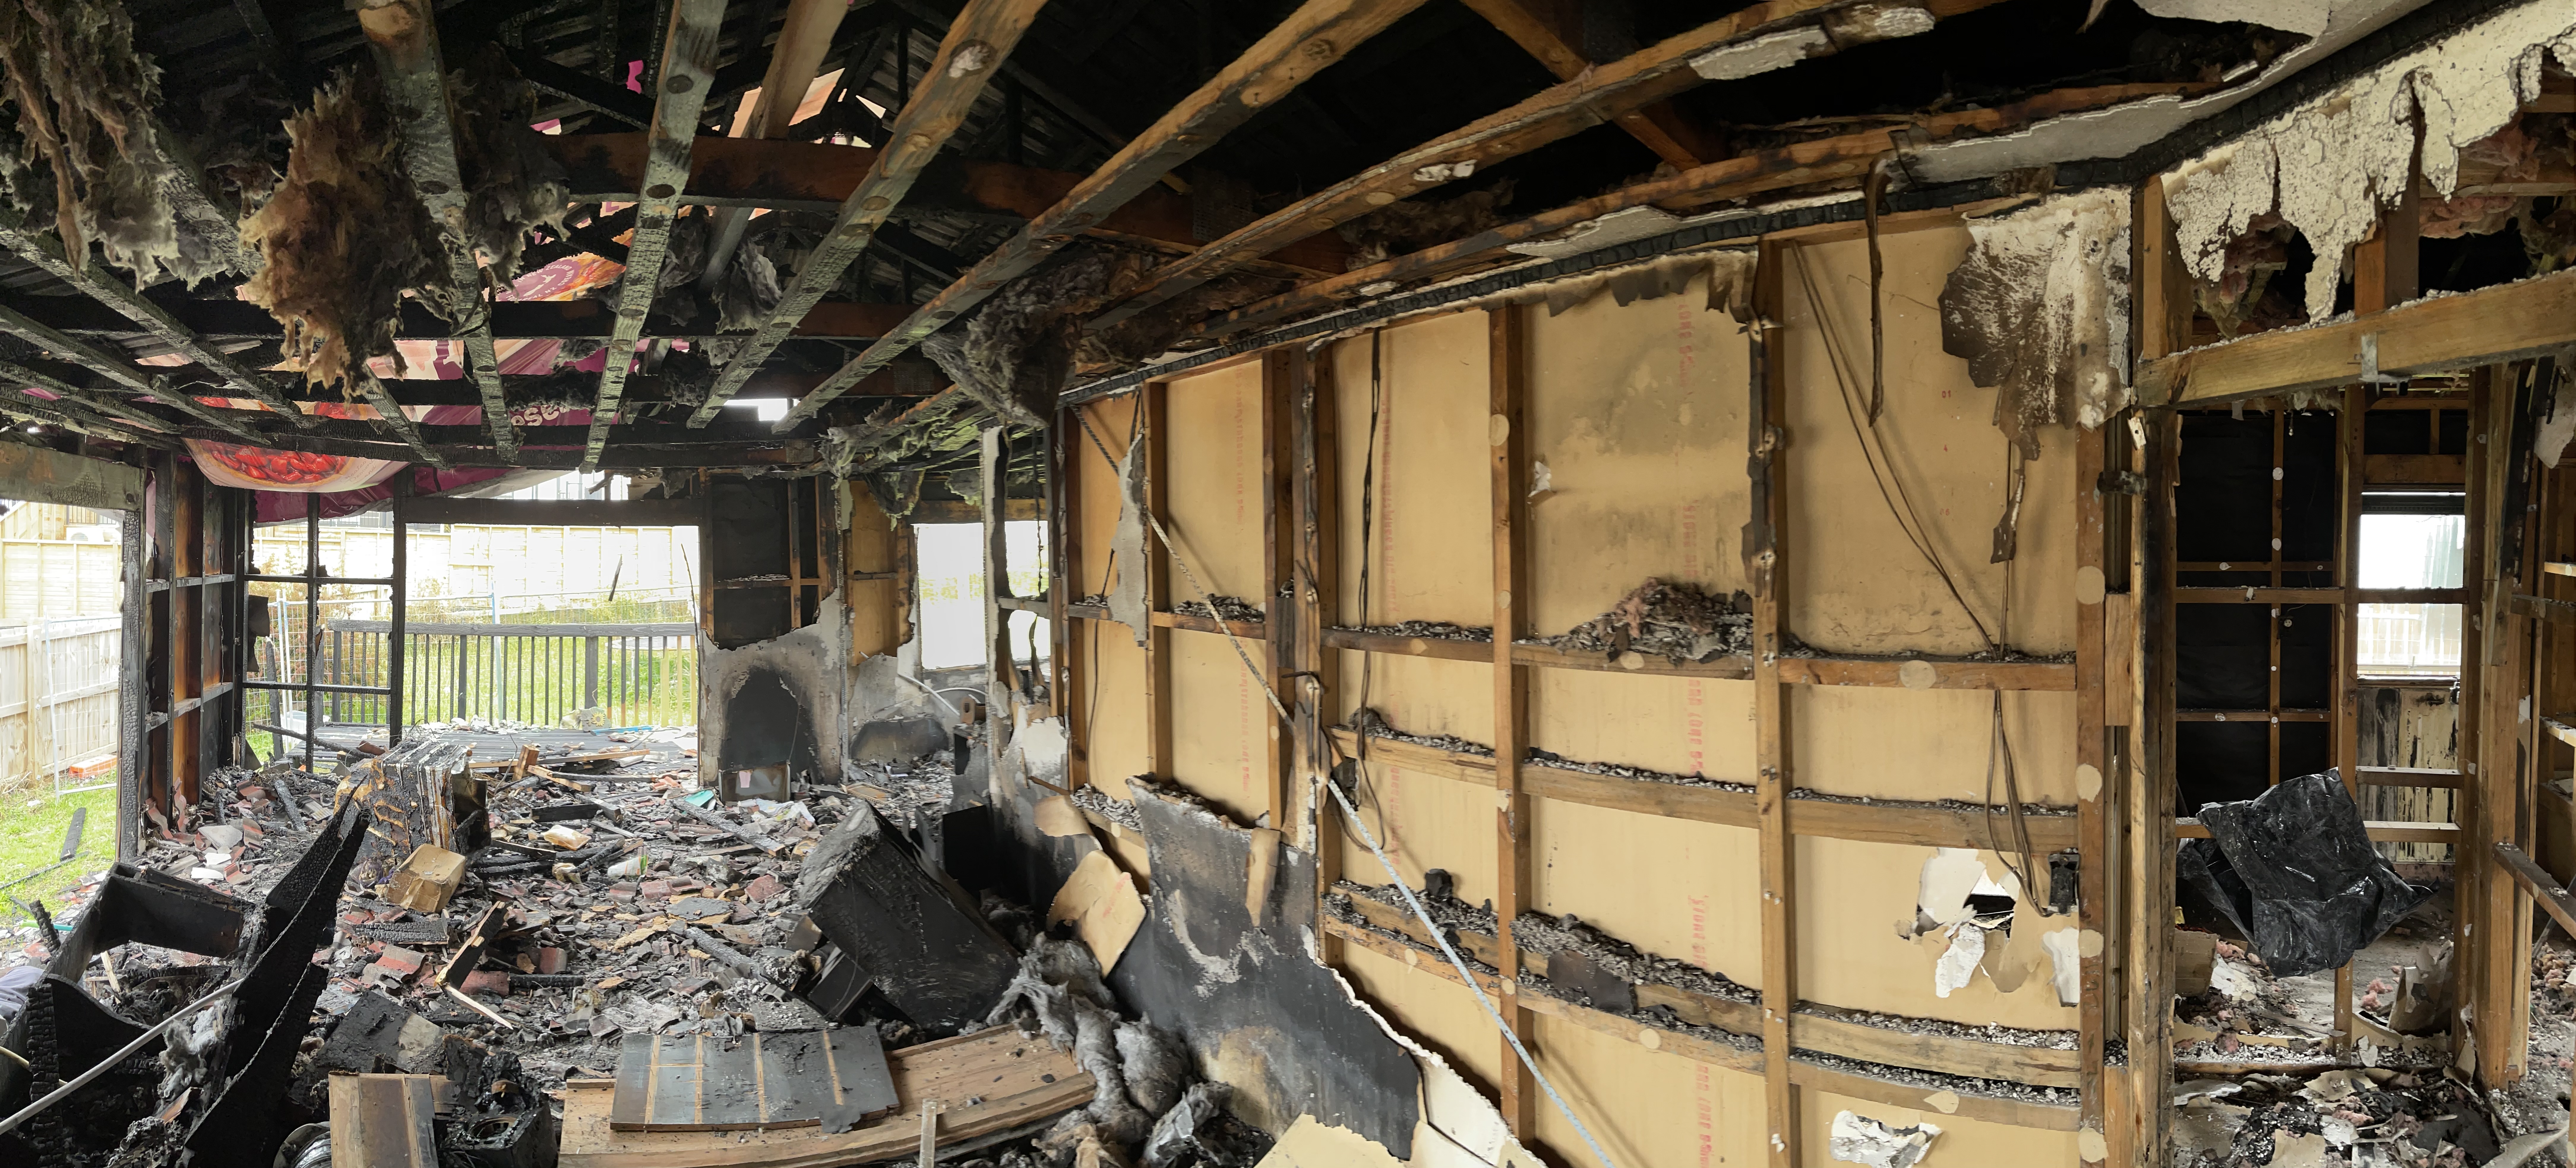 View of the lounge area of a fire damaged house before the remediation clean-up starts.